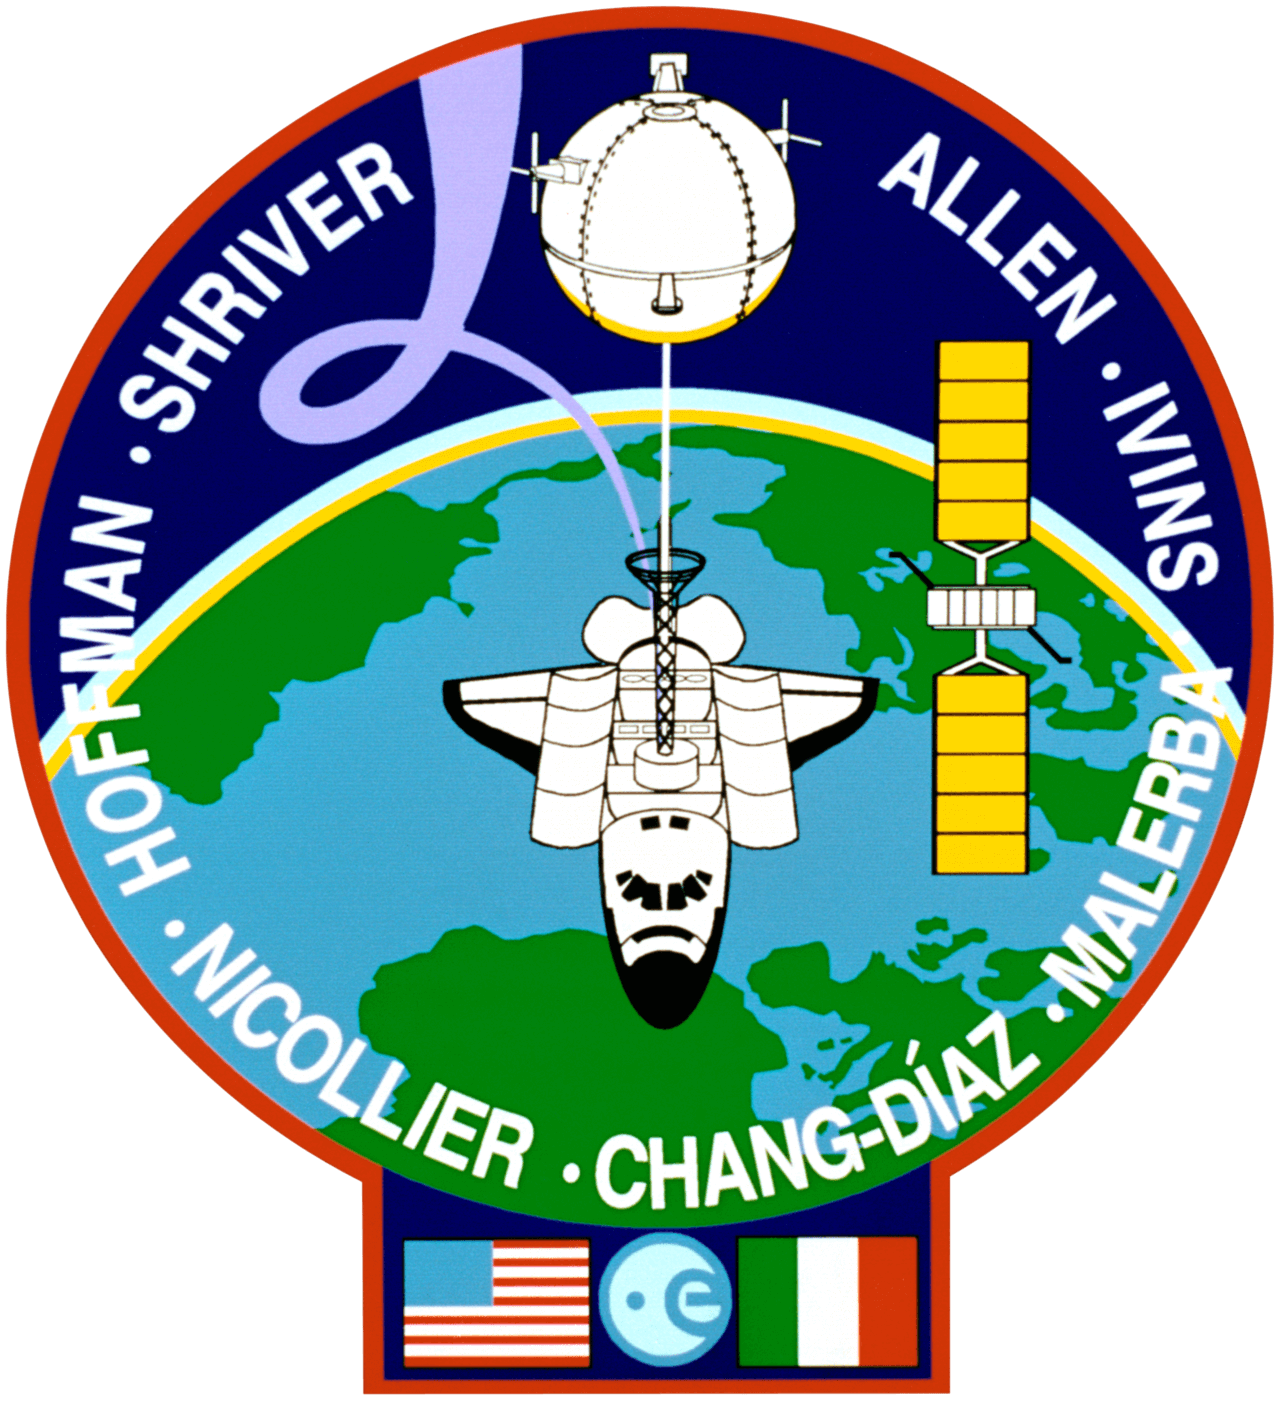 Mission patch for STS-46